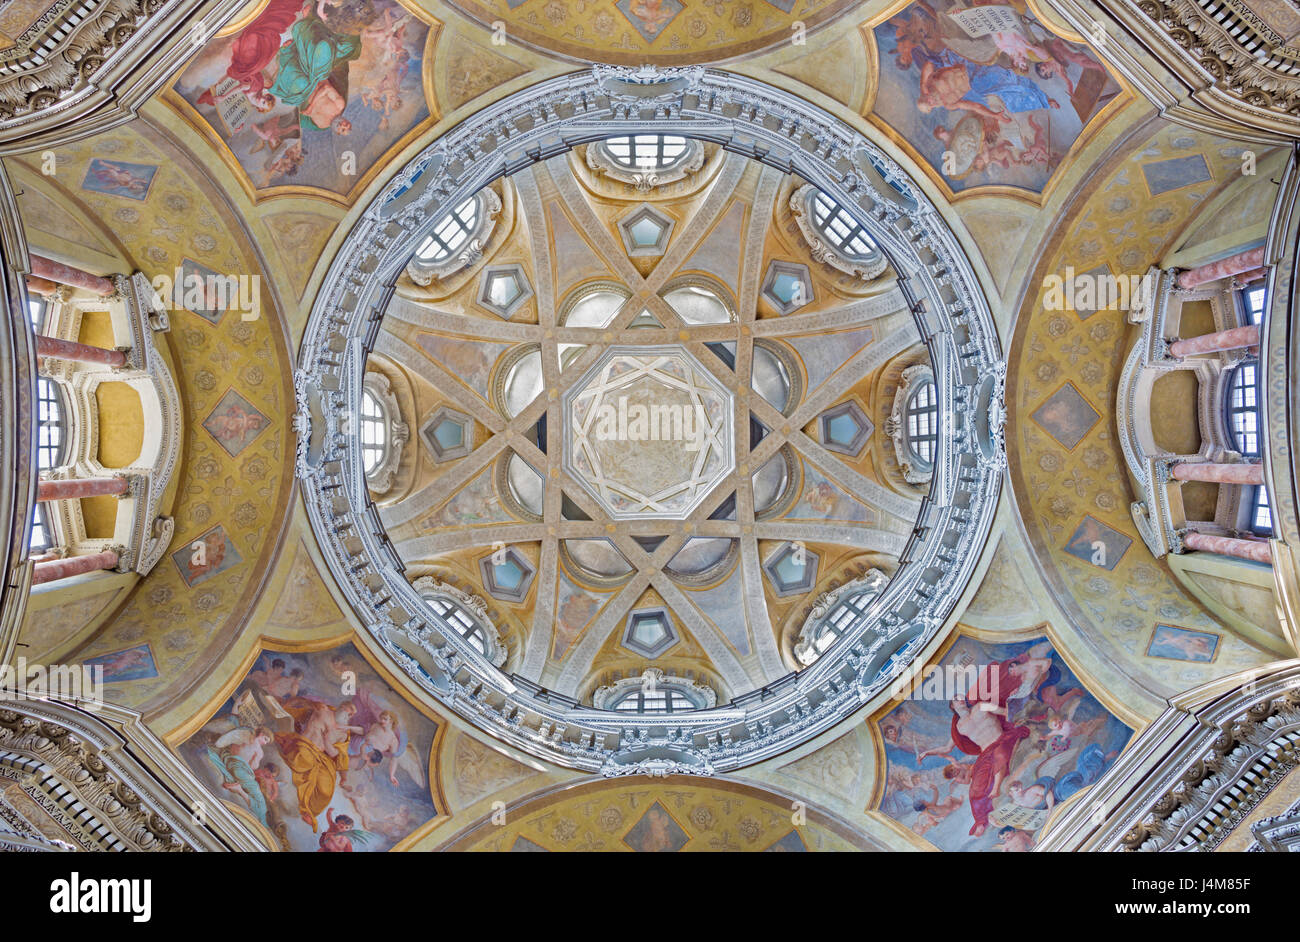 TURIN, ITALY - MARCH 13, 2017: The cupola with the frescoes of the Evangelist in church Chiesa di San Lorenzo by Carlo Felice (1827). Stock Photo